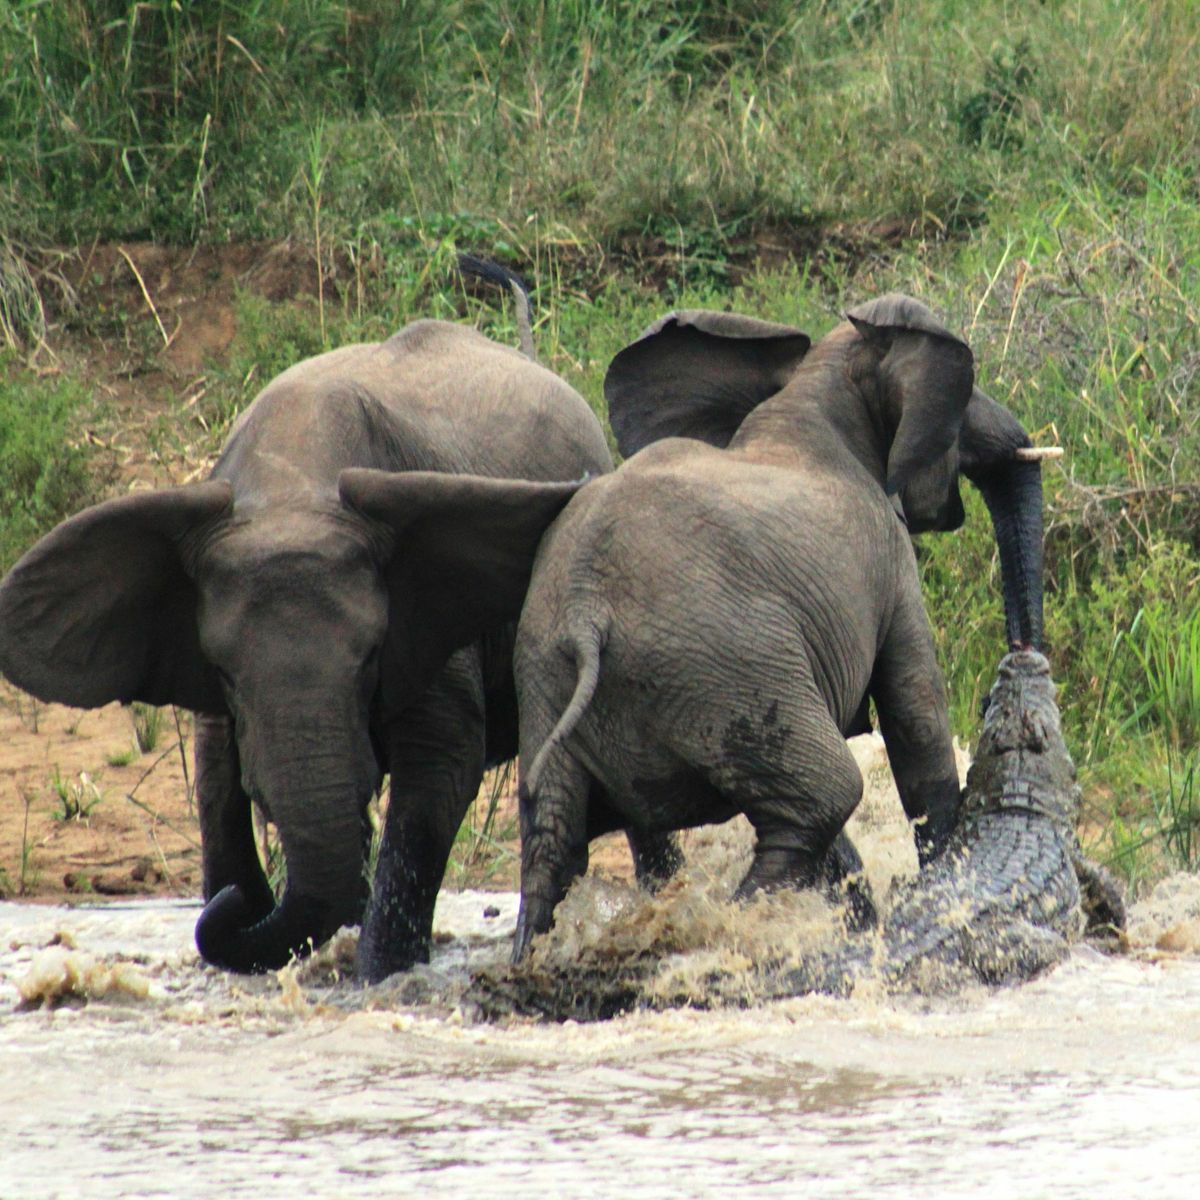 unstoppable maternal instinct mother elephant to protect her young from crocodile attack 5519 3